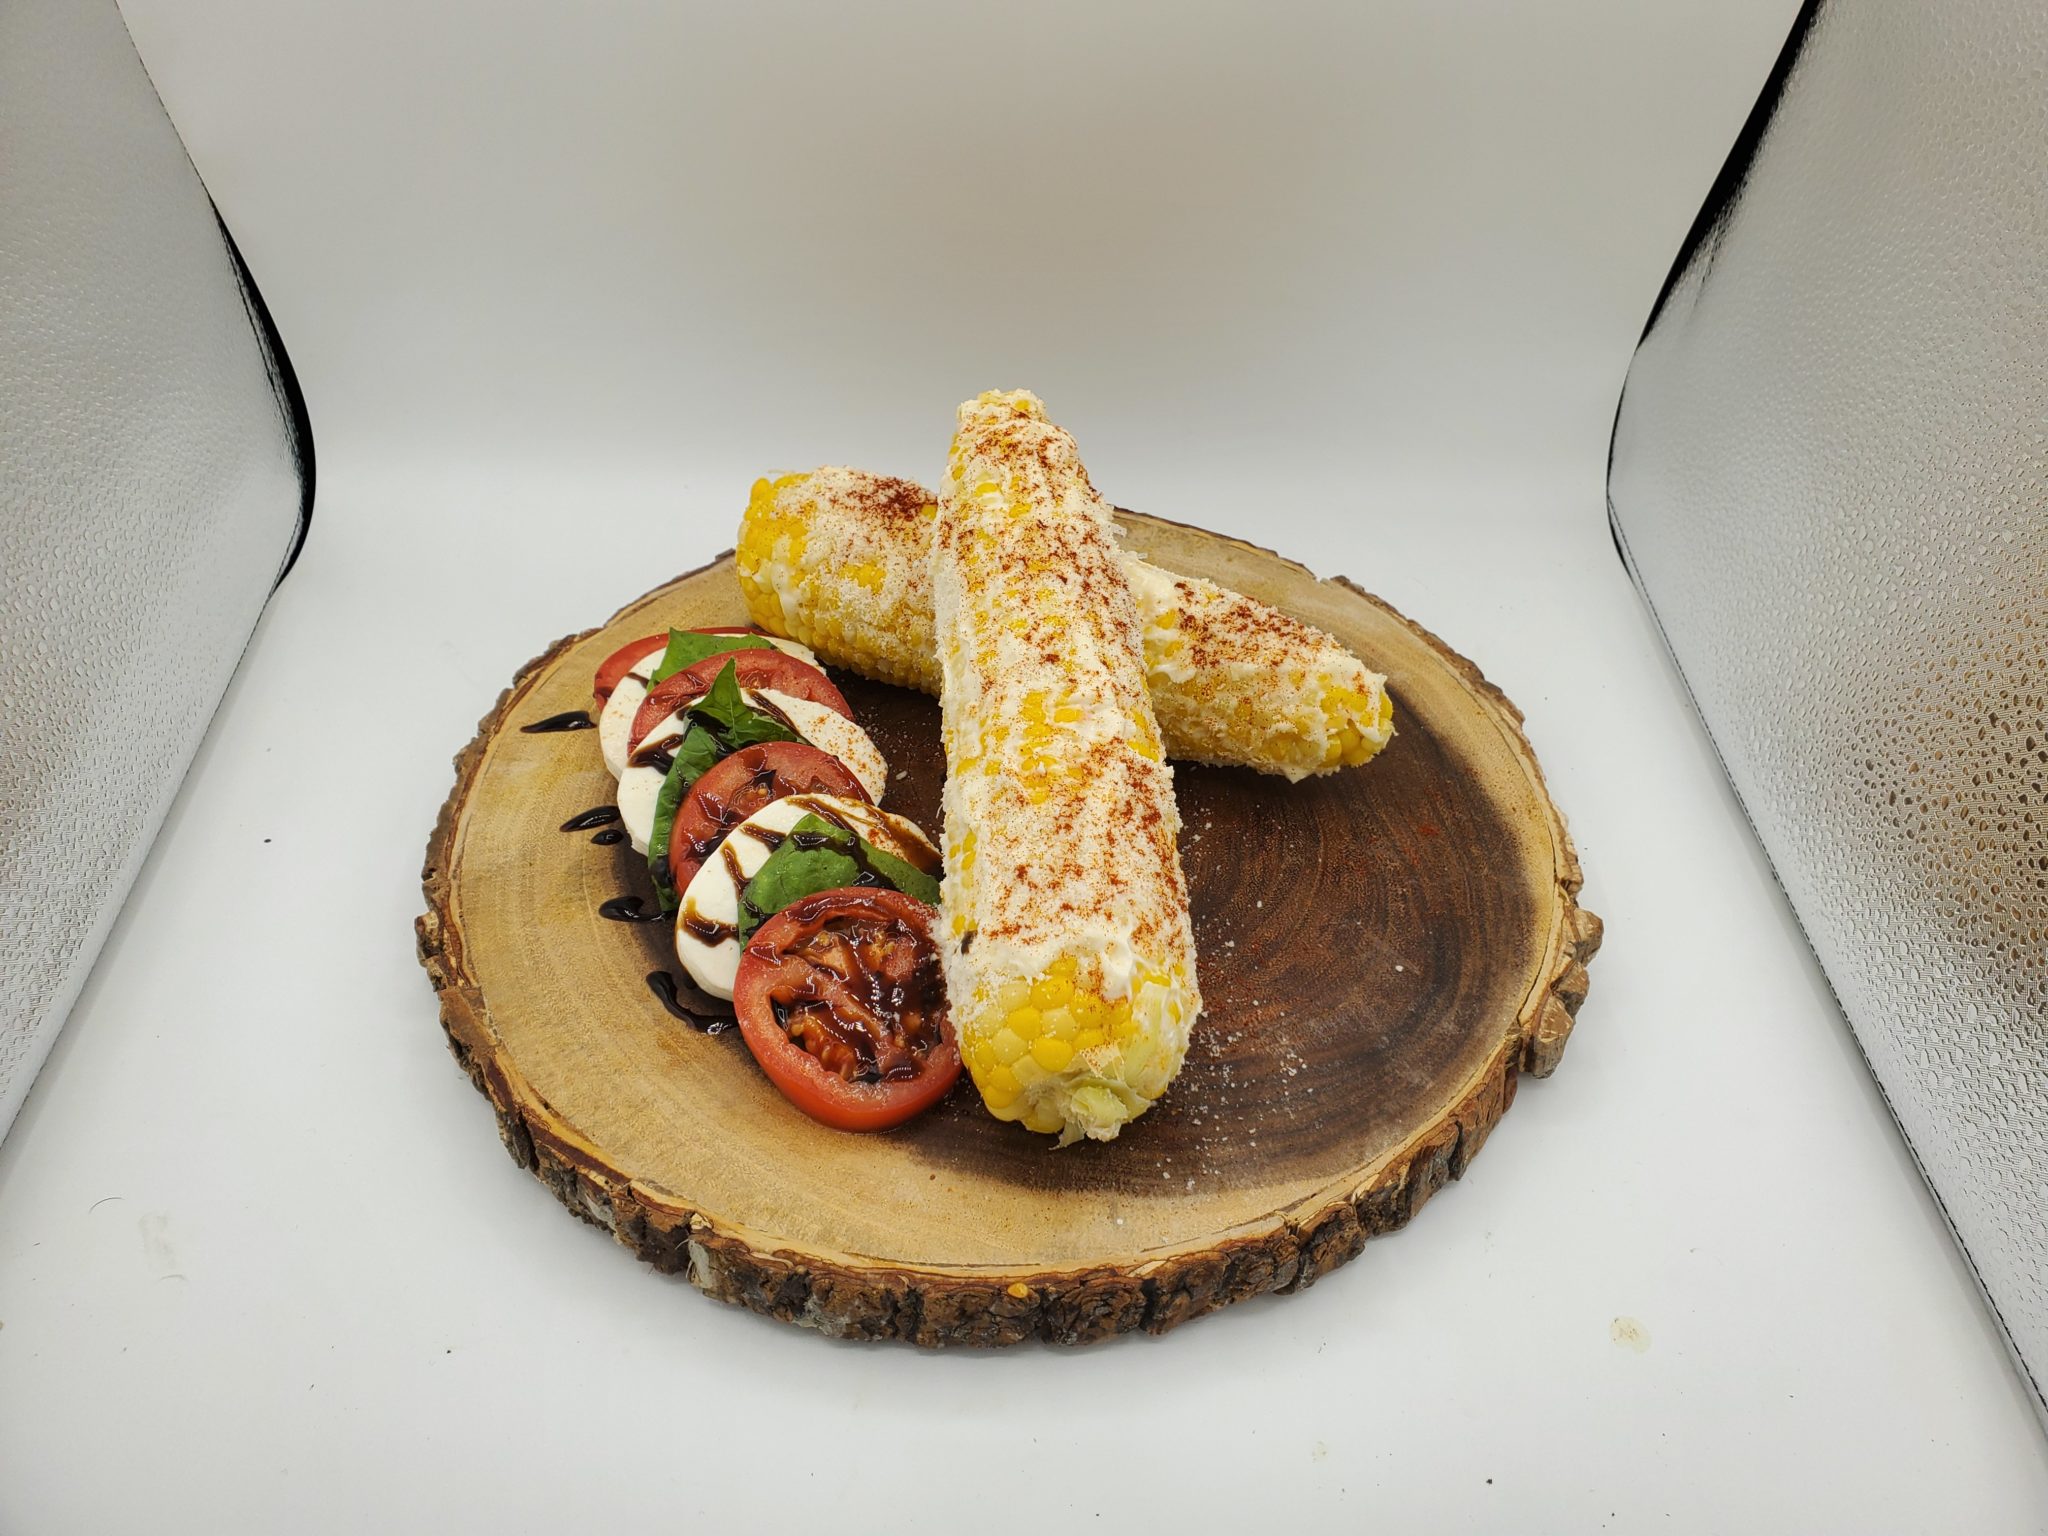 Chef Andy: This One’s a Little Corny